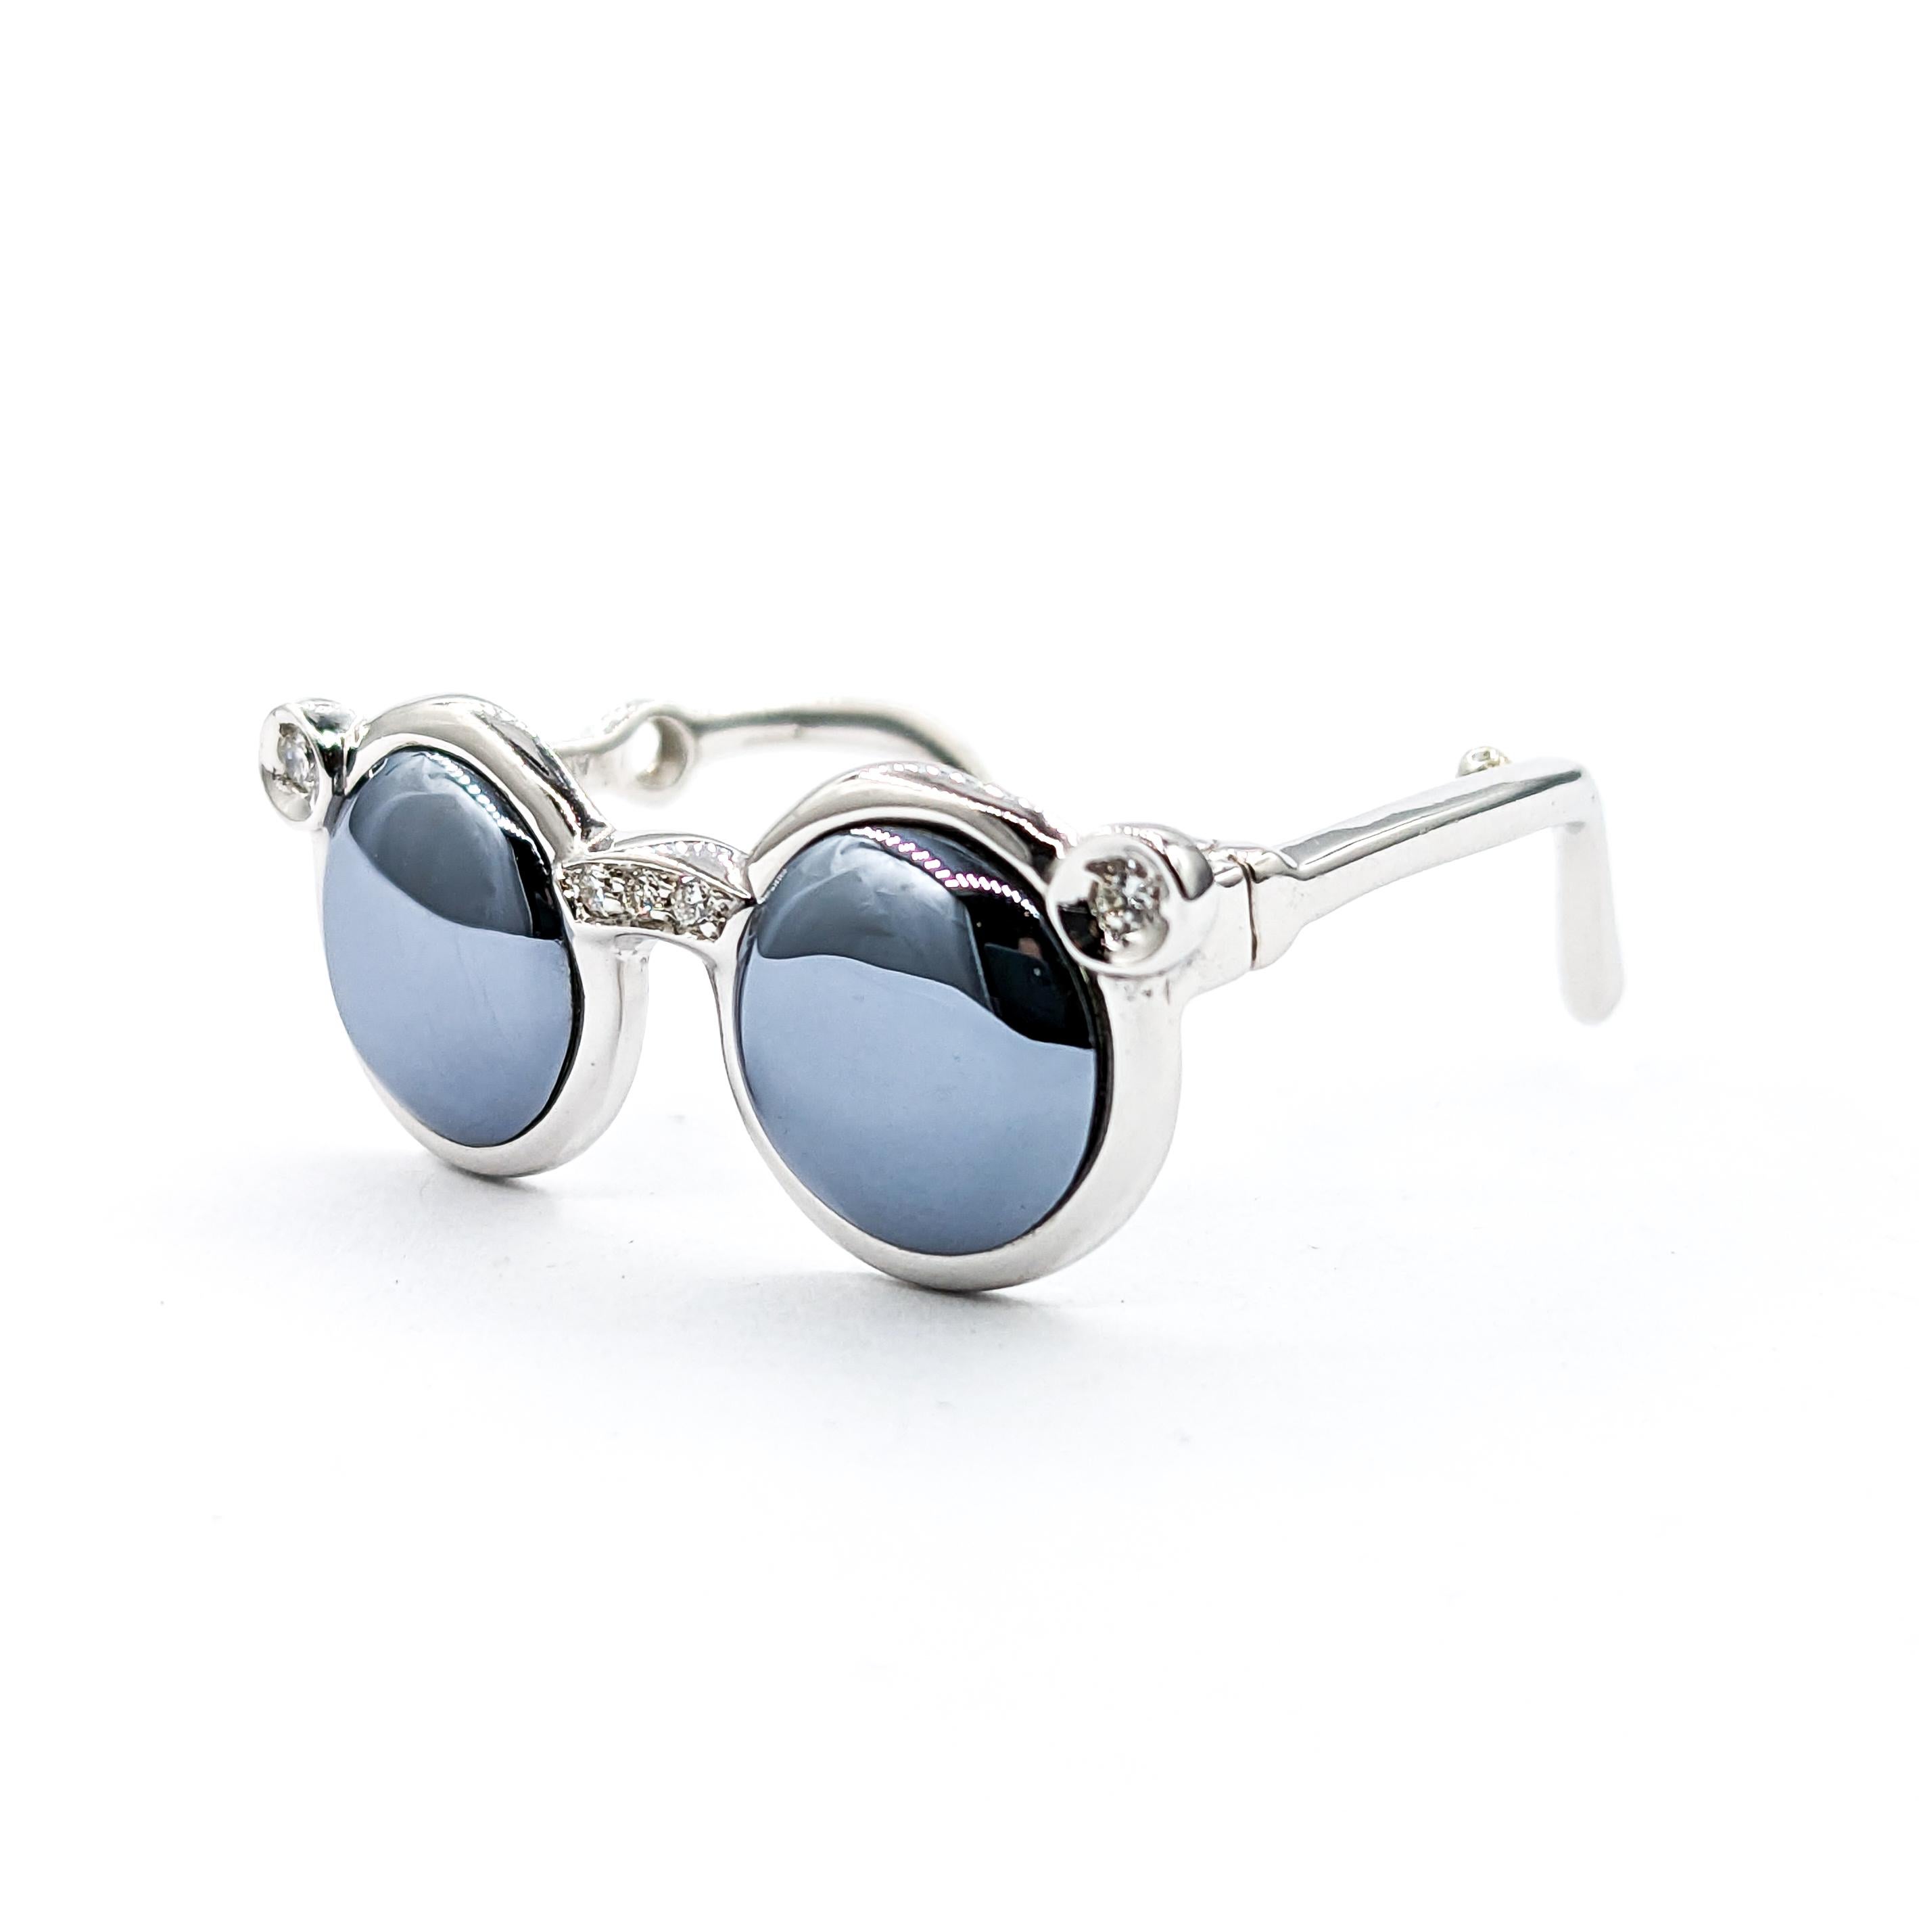 Marcasite & Diamond Sunglasses Pendant In White Gold

Introducing a stylish Pendant Sunglasses, meticulously crafted in 18kt White Gold and adorned with a .03ctw of Round Diamonds. The Sparkly Diamonds showcase SI clarity and a Near Colorless white